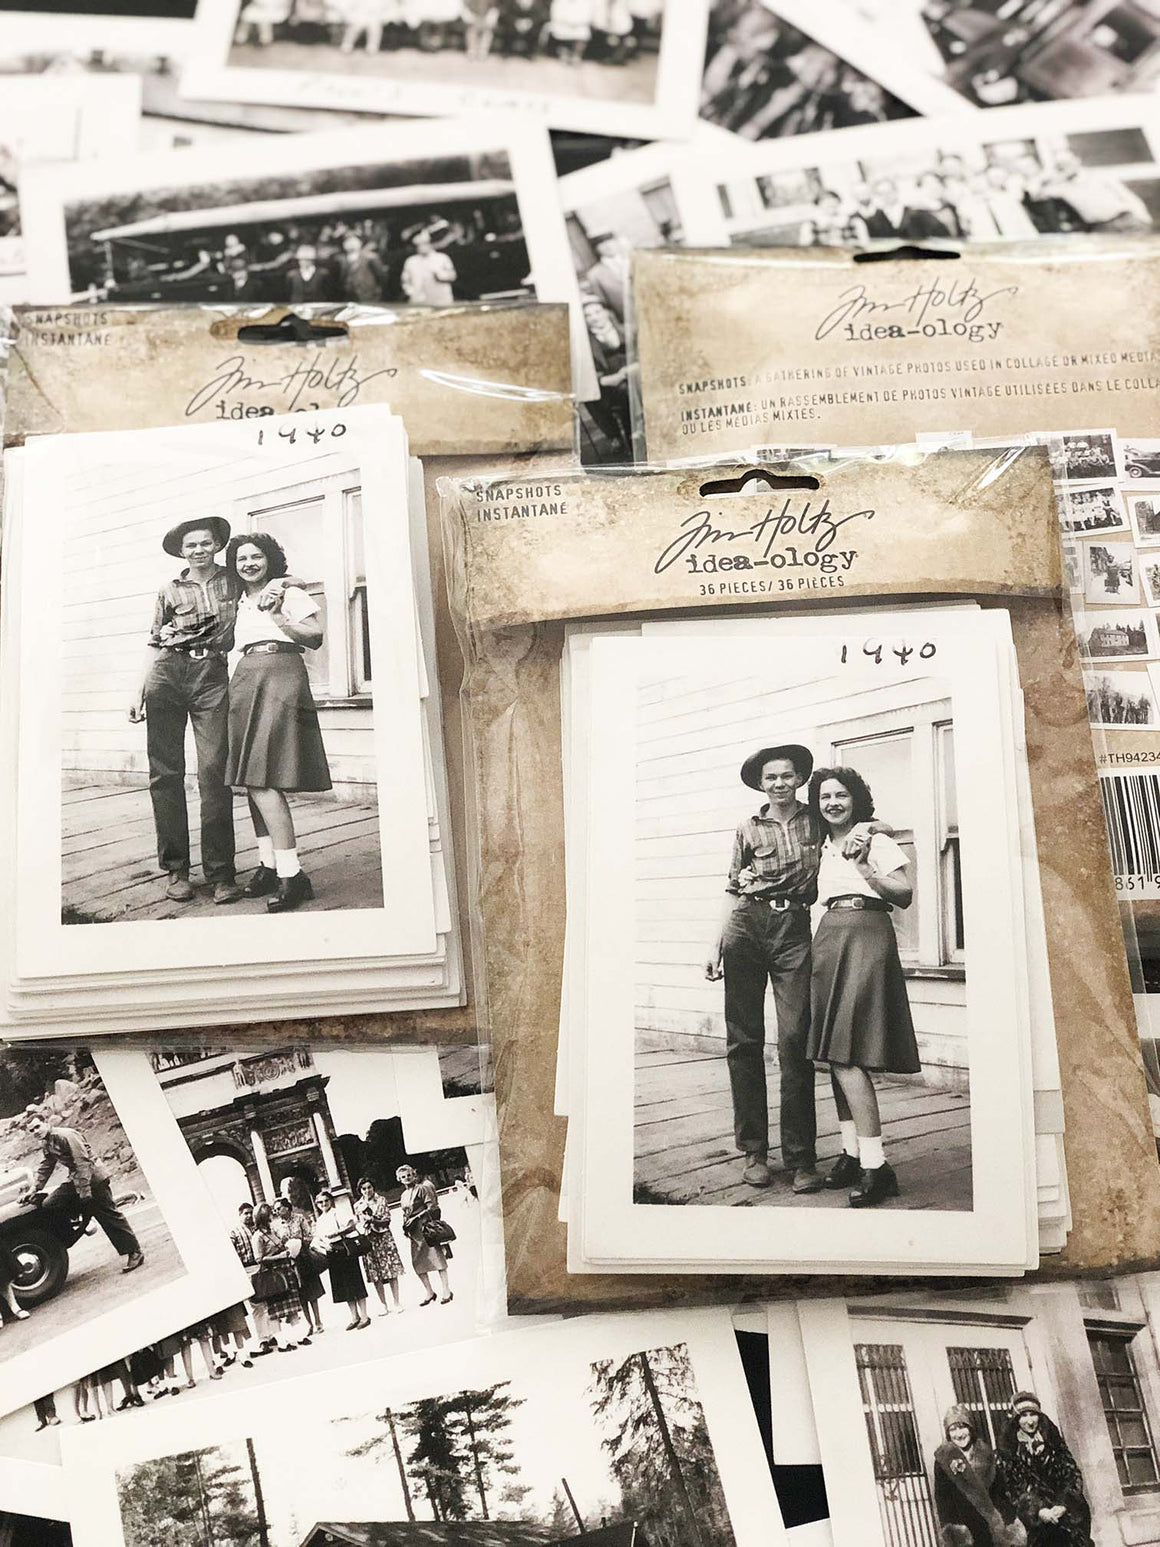 Tim Holtz® New Idea-ology 'Snapshots' 36 pack Old Photos stack TH94234 from micmoc.com at Mic Moc